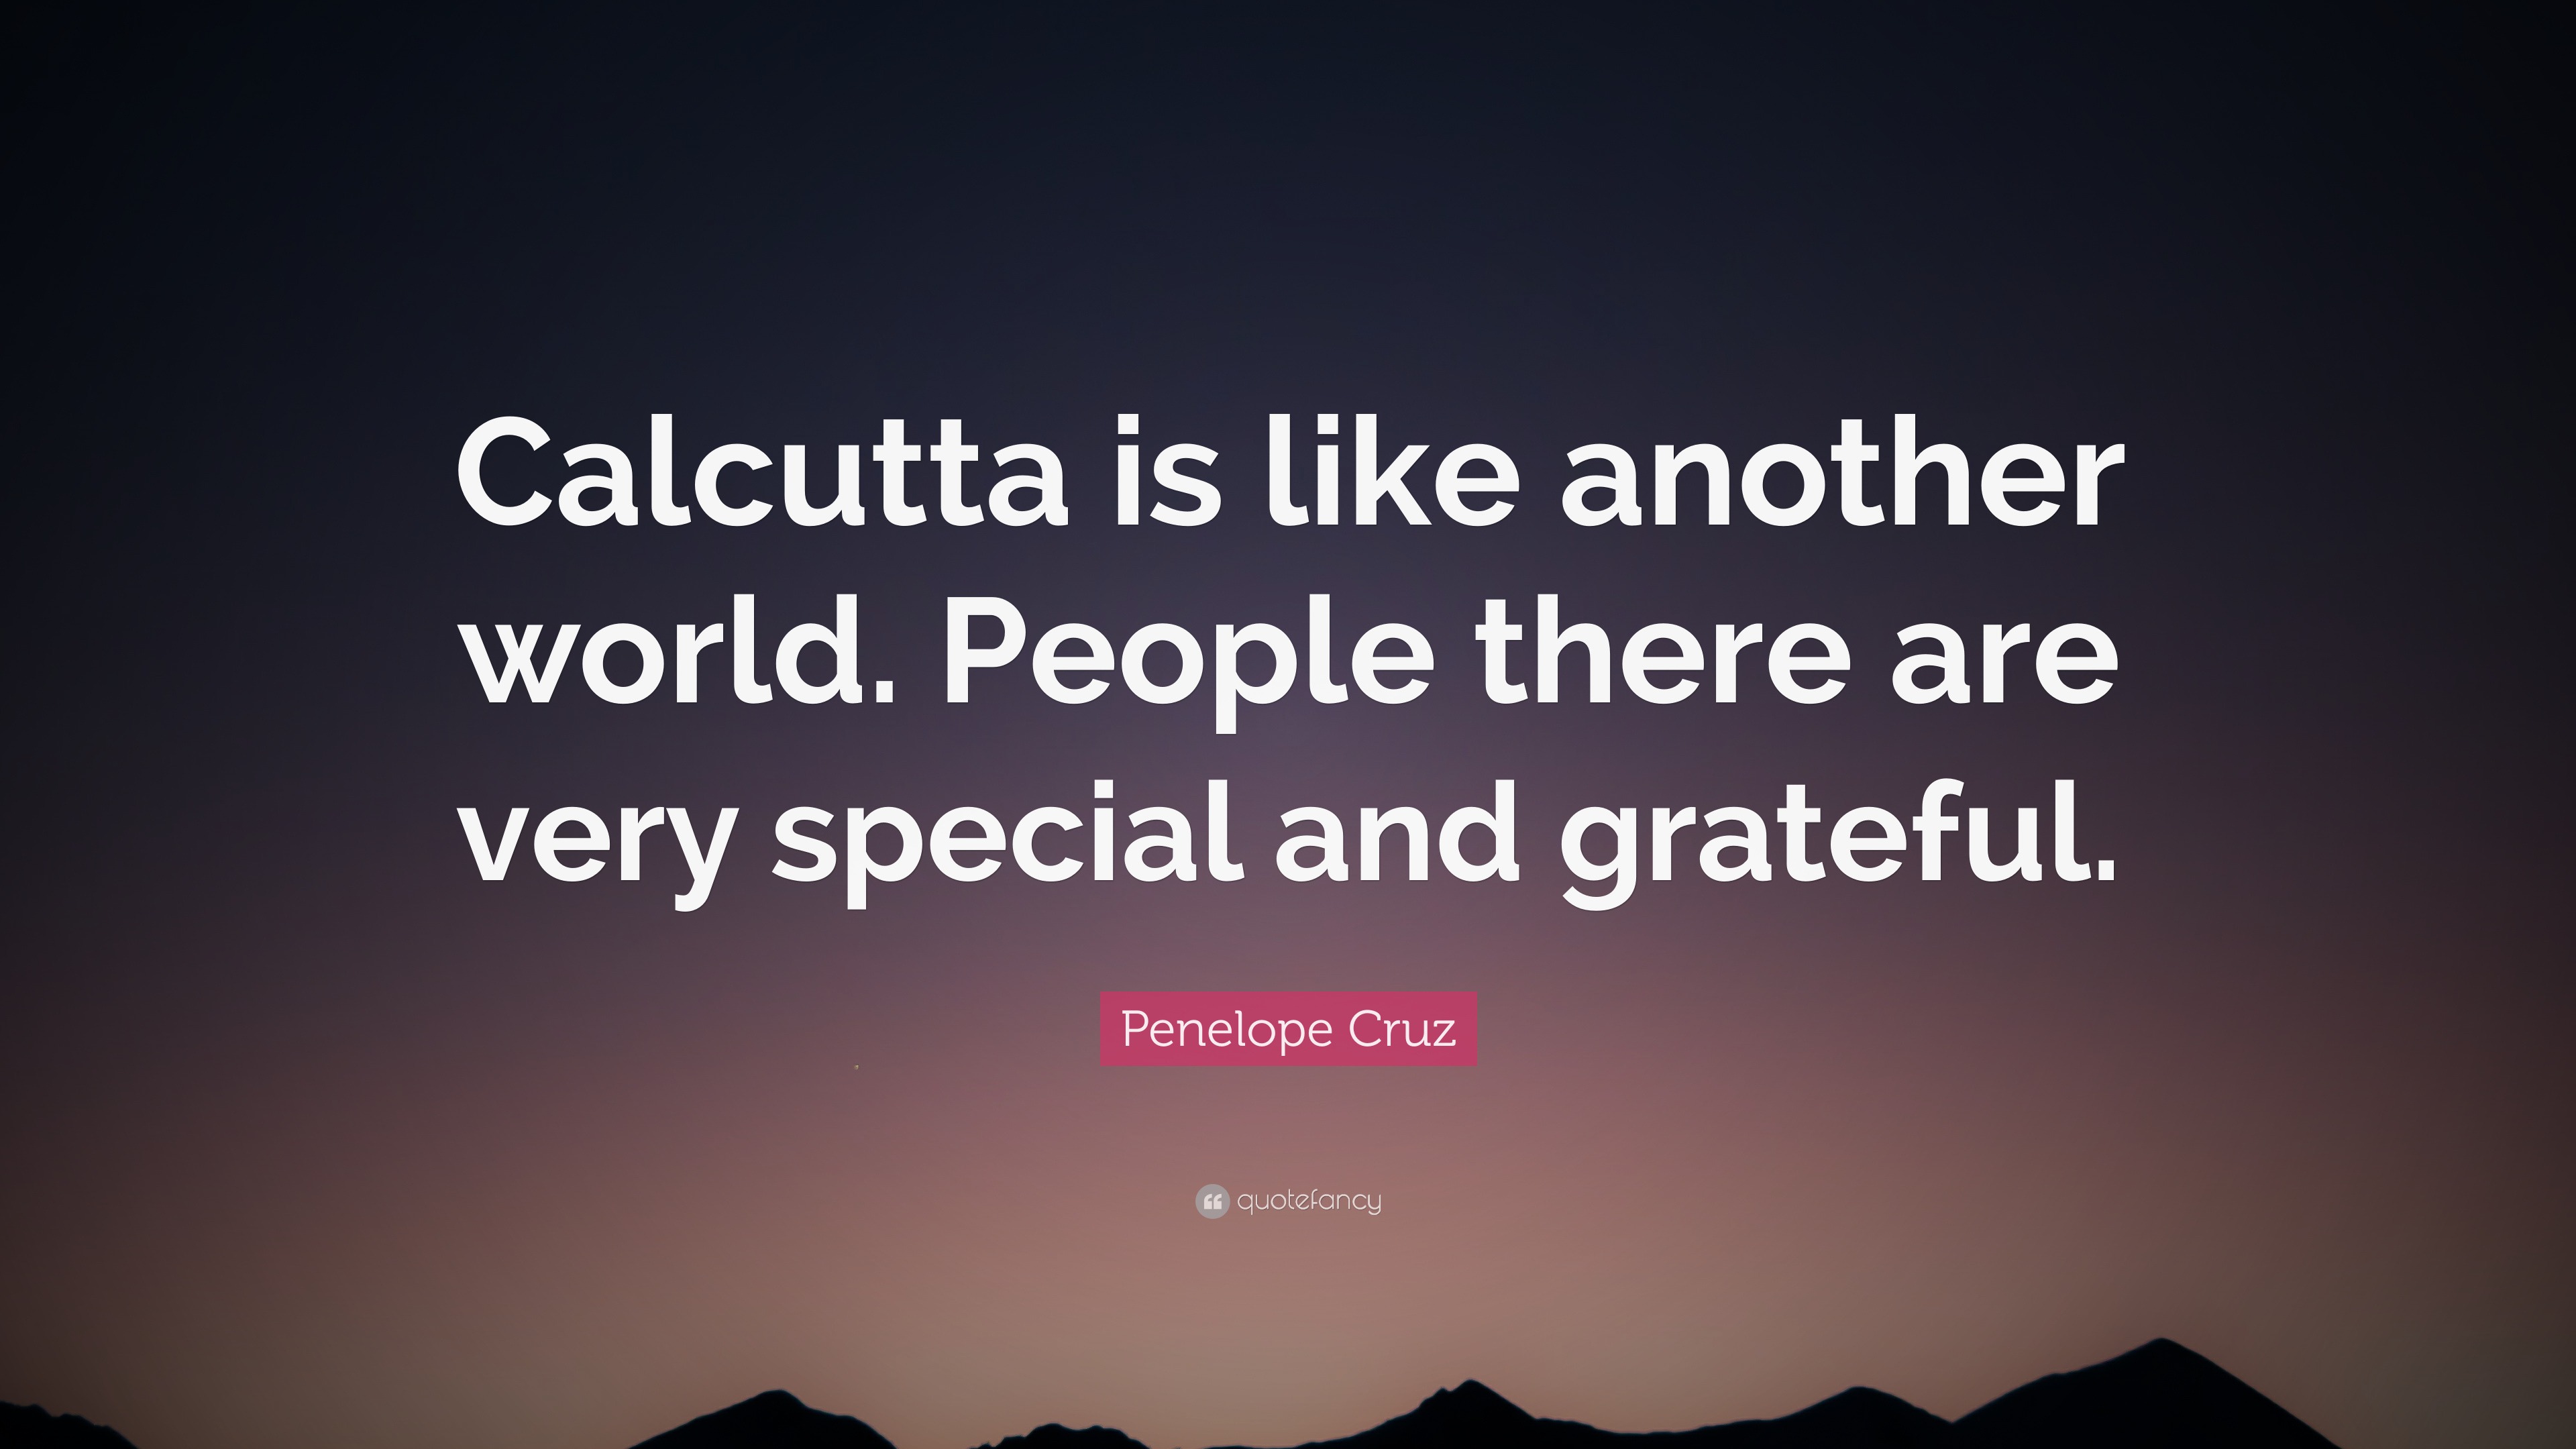 Penelope Cruz Quote: “Calcutta is like another world. People there are very  special and grateful.”